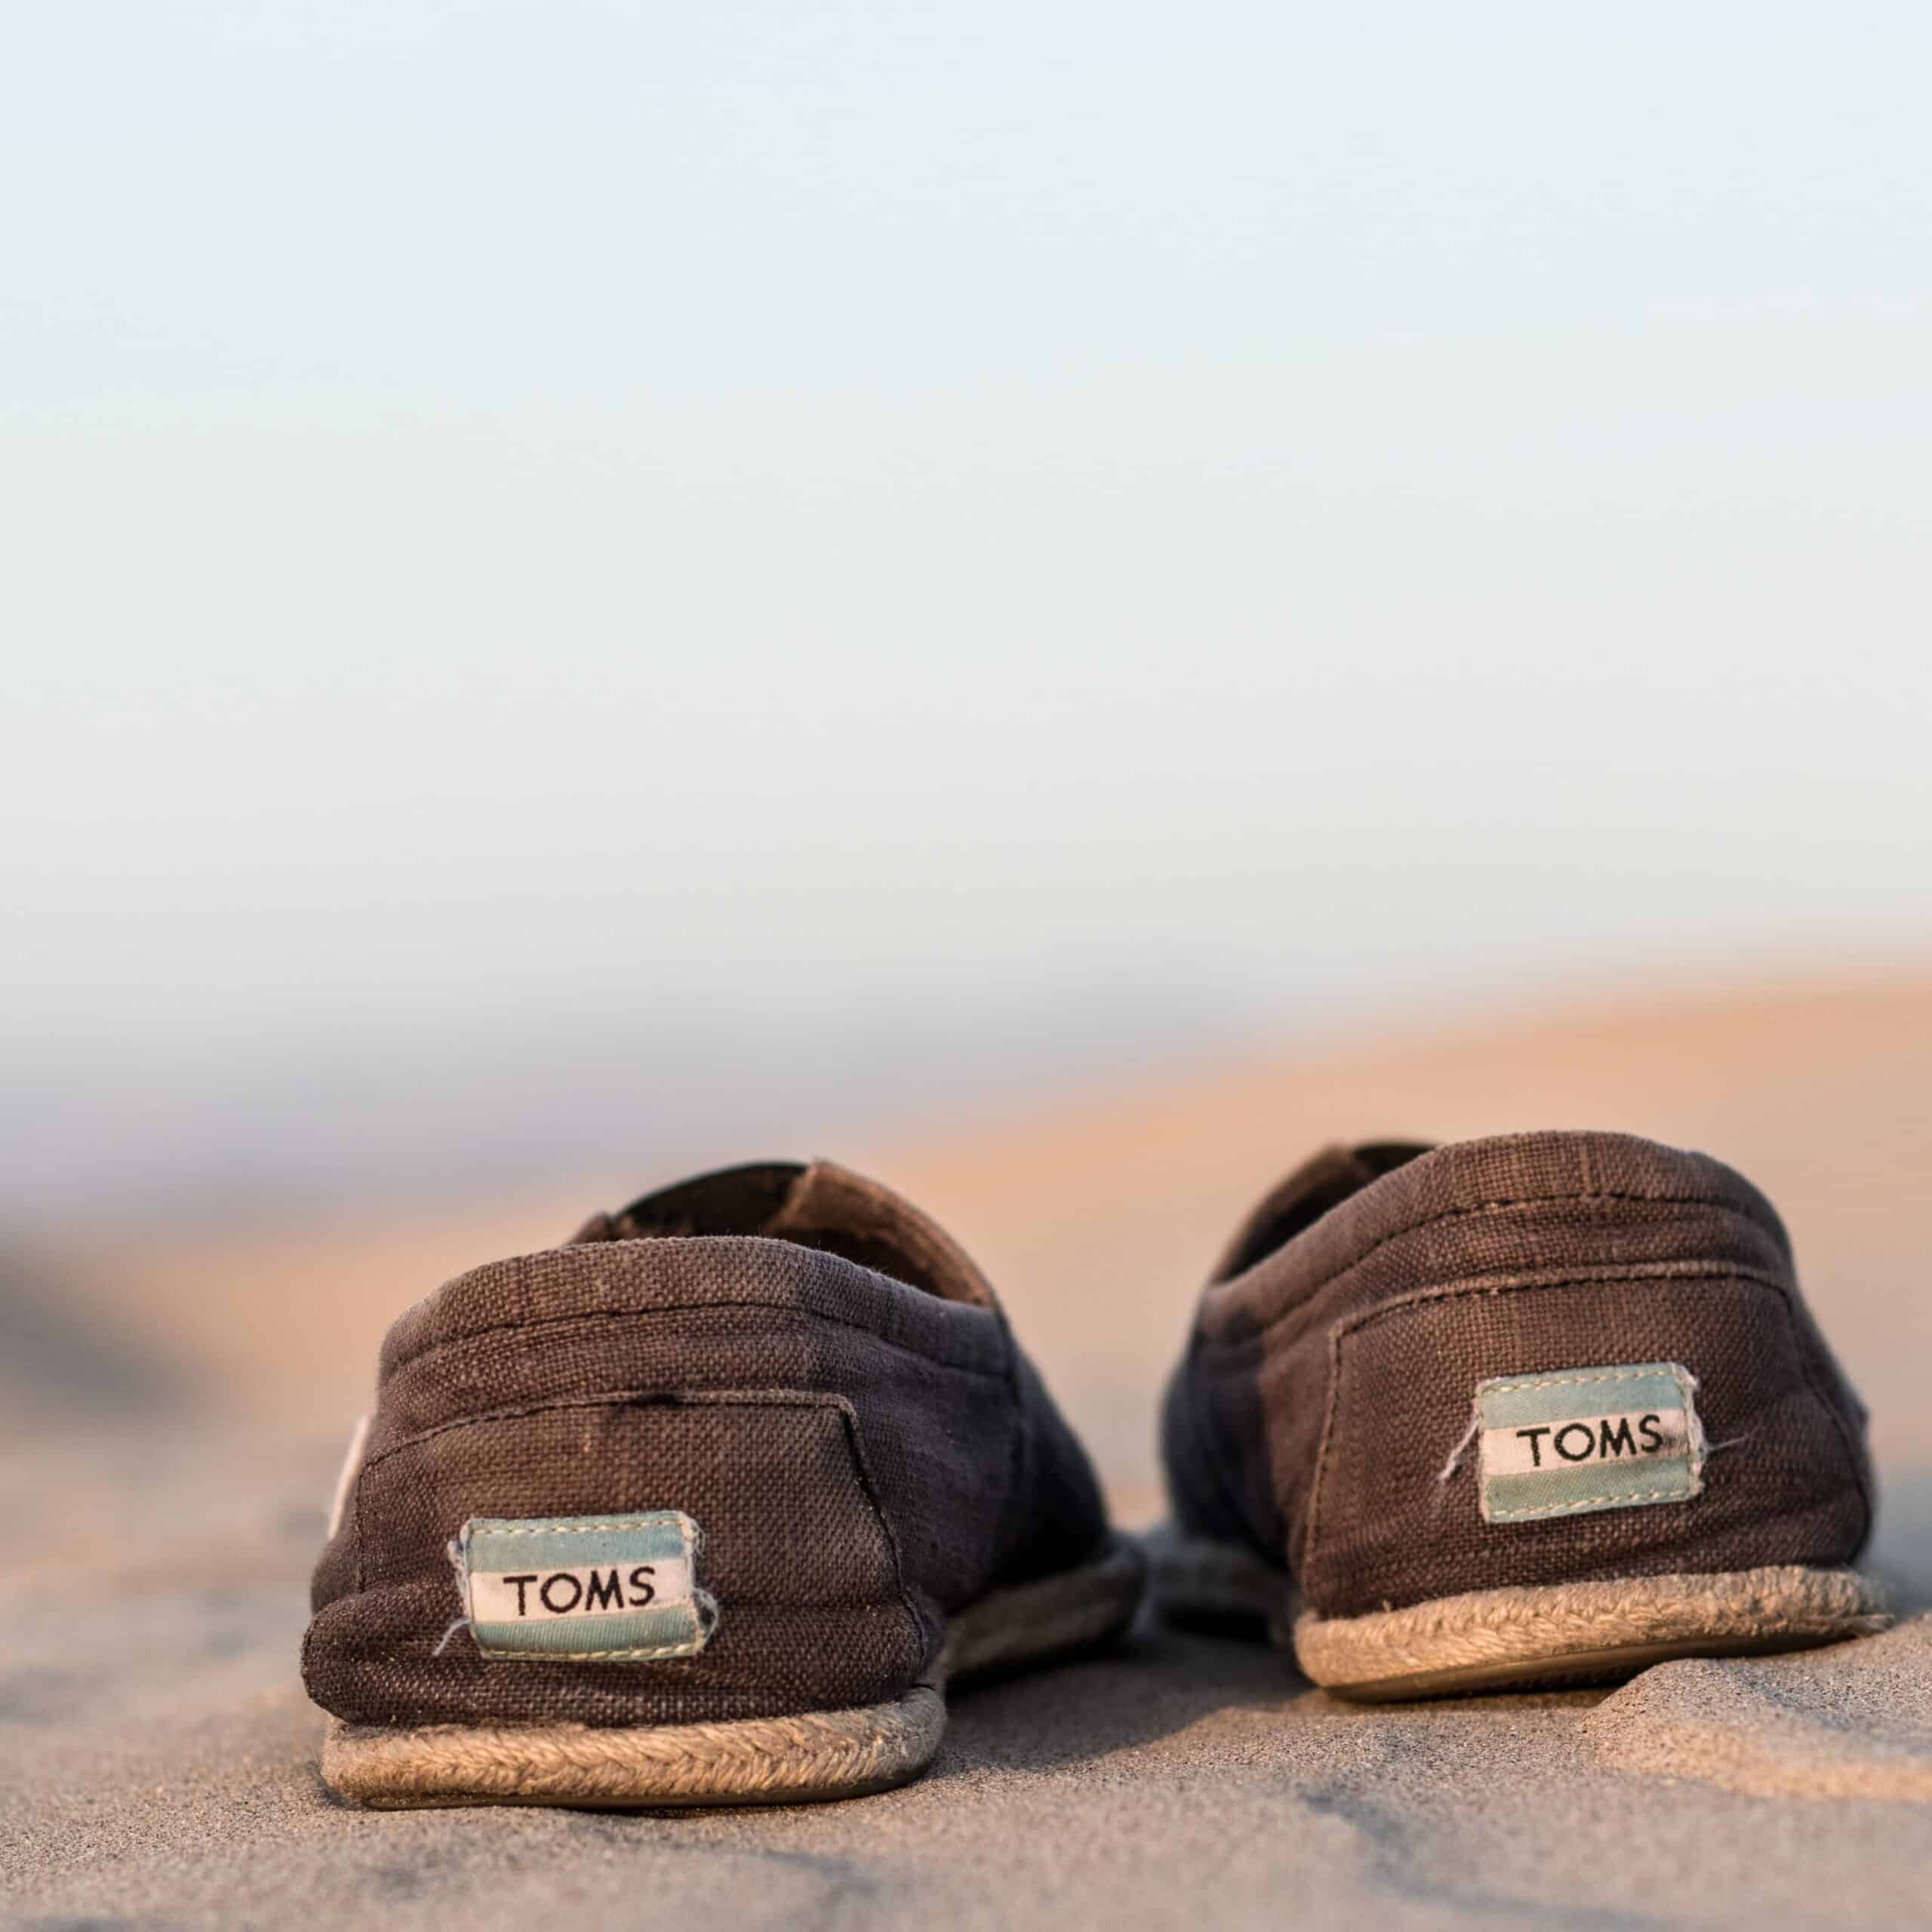 Bobs Vs. Toms – Who Wins The Battle Of Nobility And Comfort?